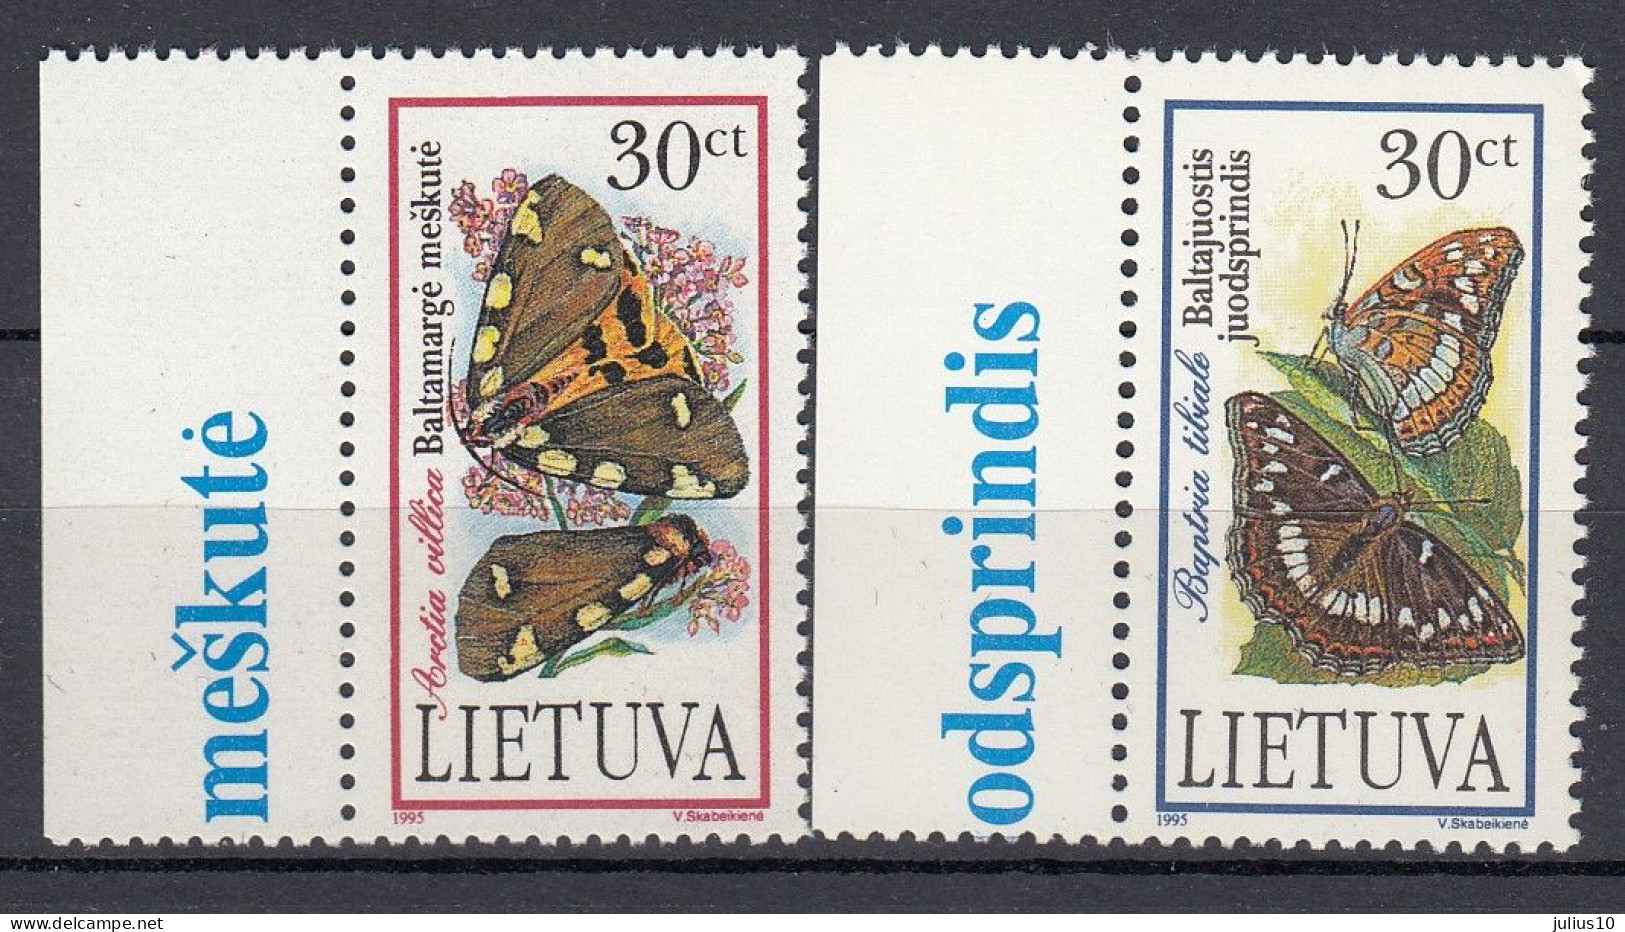 LITHUANIA 1995 Fauna Insects Butterflies MNH(**) Mi 589-590 #Lt1136 - Lithuania